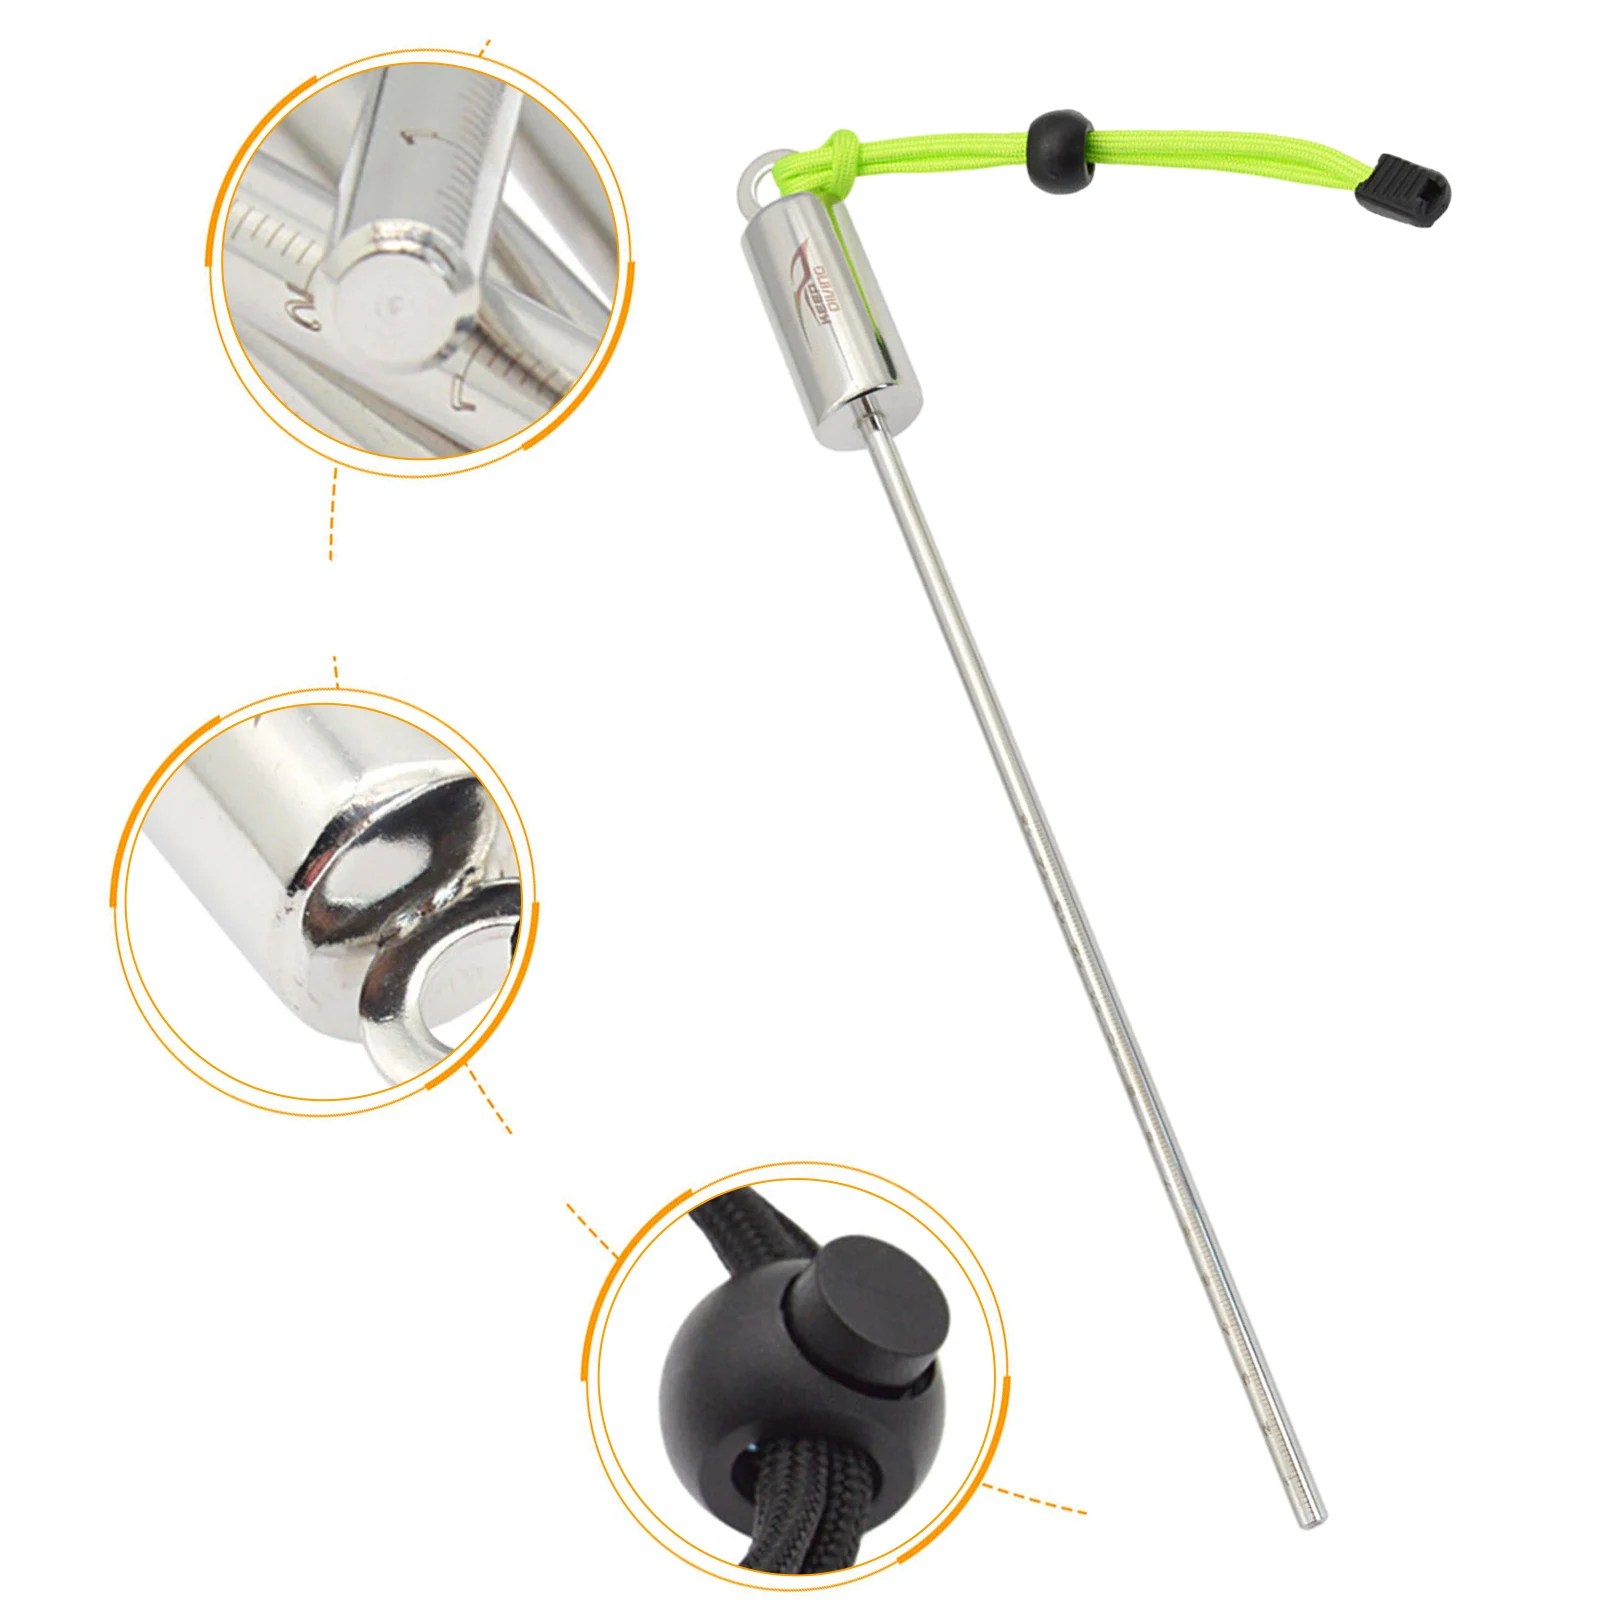 

Diving Rattle Ding Ding Stick Stainless Steel Underwater Probe With Hand Strap Stainless Steel Lobster Diving Stick Pointer Rod